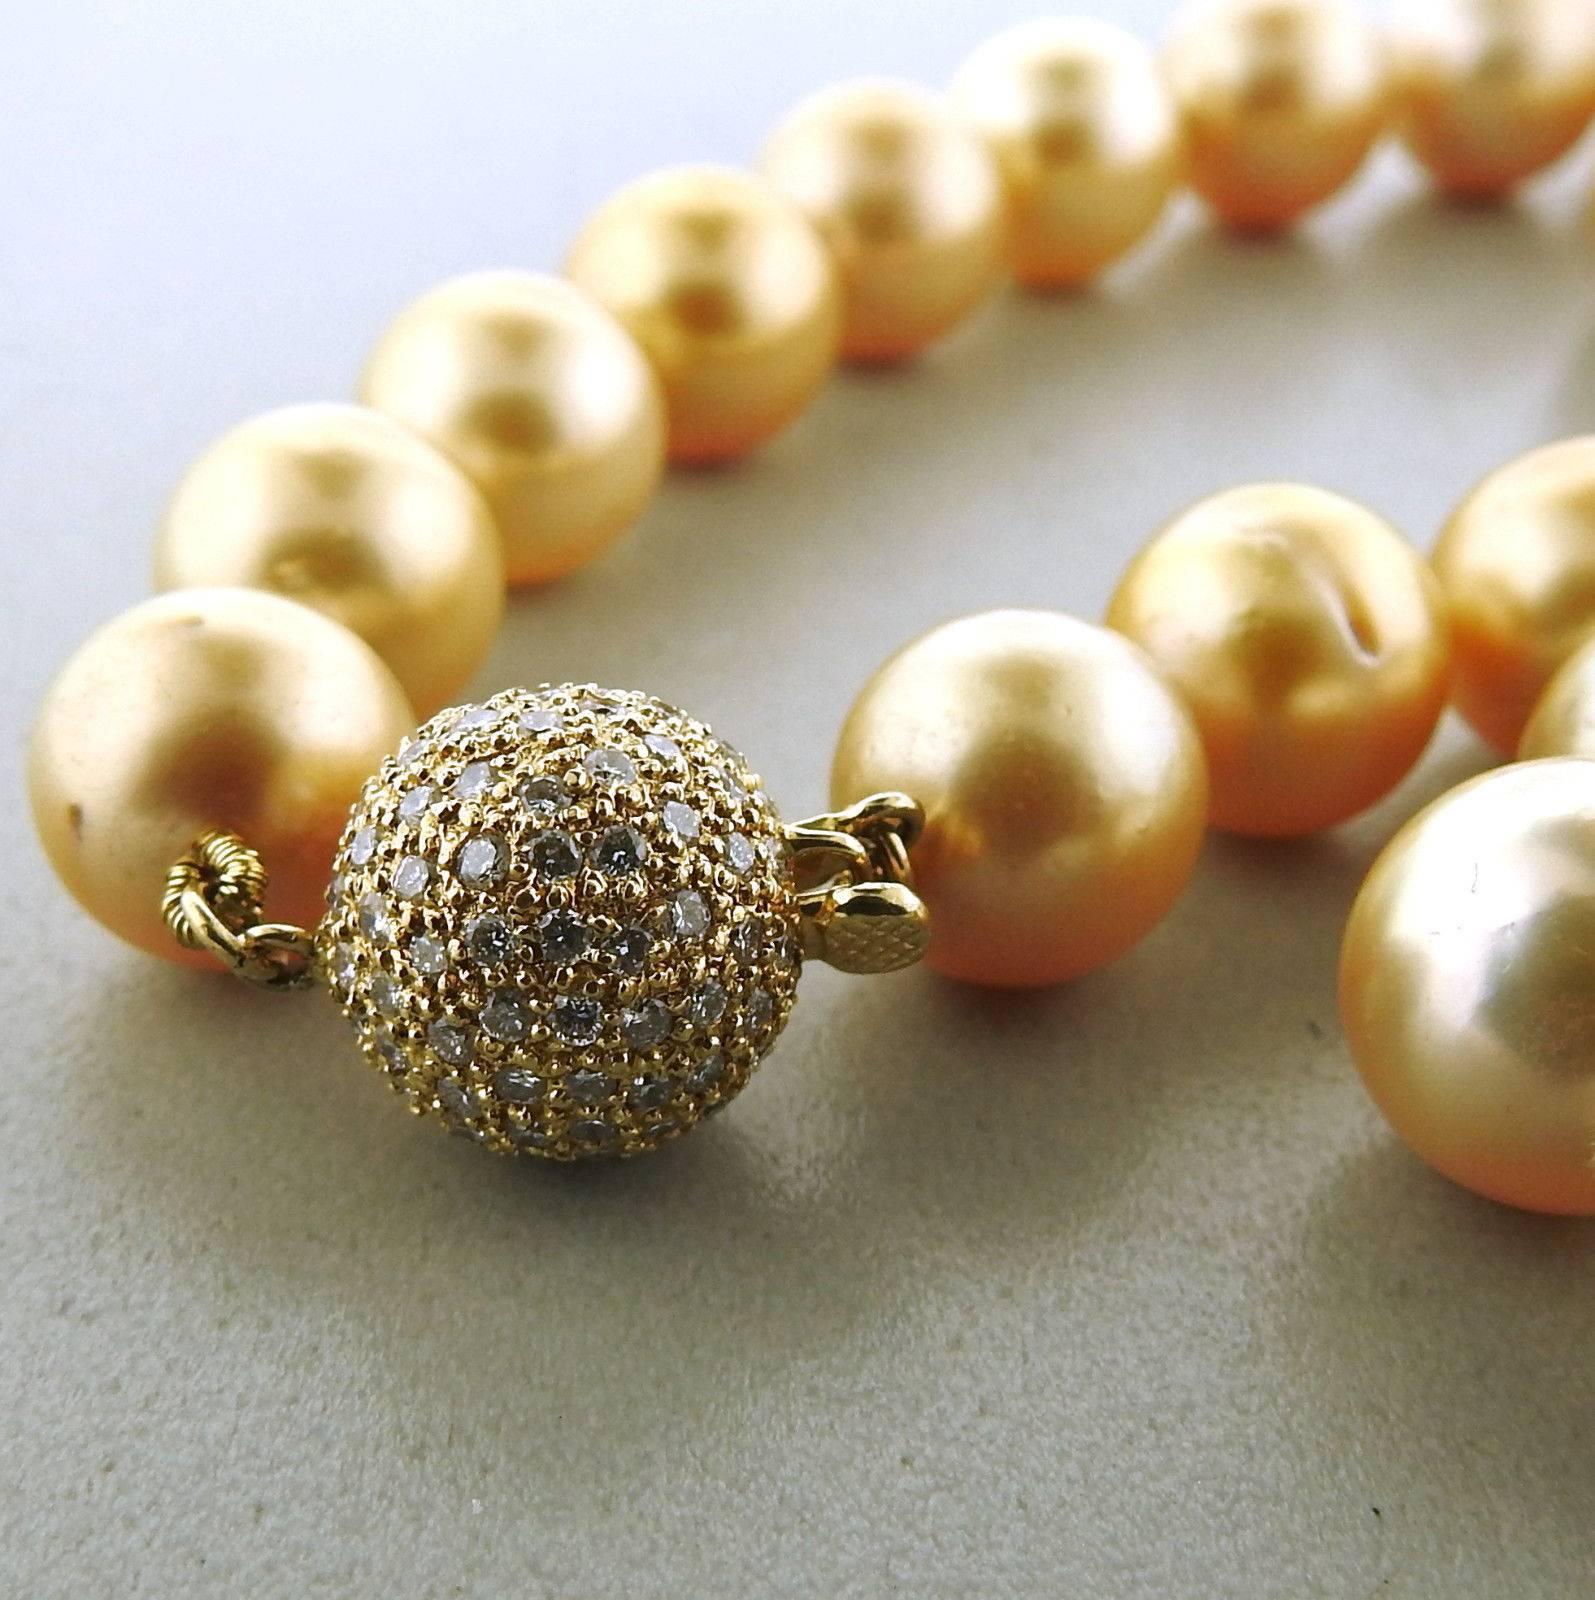 An 18k yellow gold necklace set with golden South Sea pearls measuring 10.5mm - 12.7mm in diameter and a diamond clasp.  The necklace is 20" long and weighs 83.7 grams. Marked: 750, 18k.